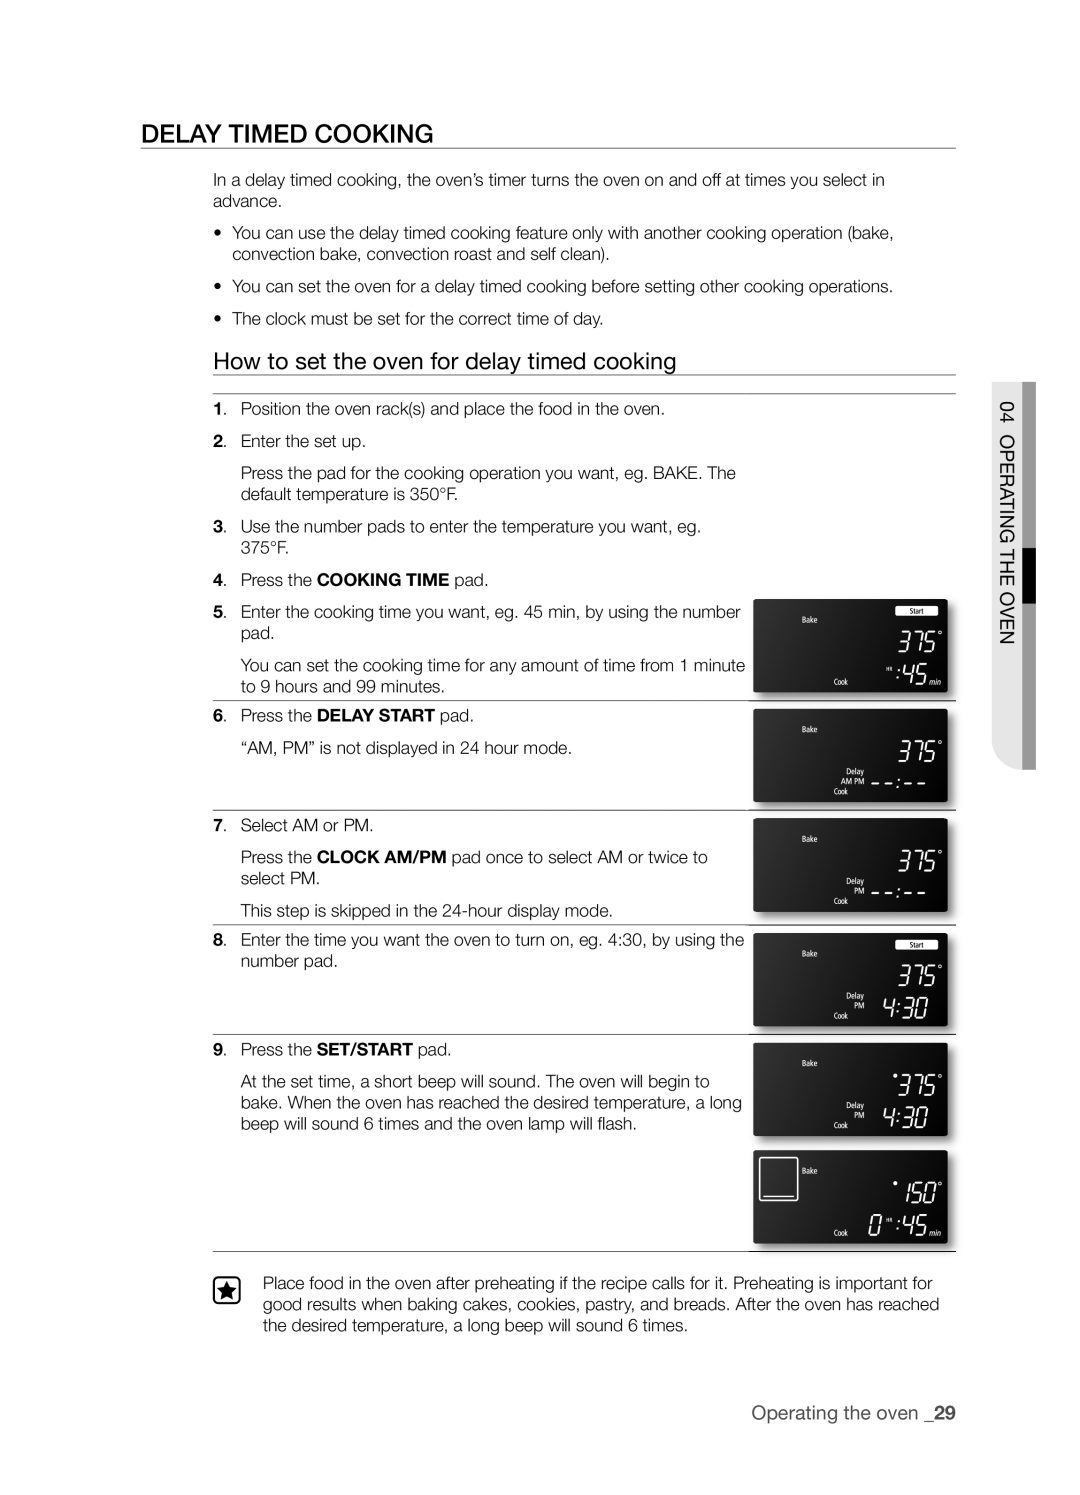 Samsung FTQ386LWUX user manual Delay Timed Cooking, How to set the oven for delay timed cooking, Operating The Oven 